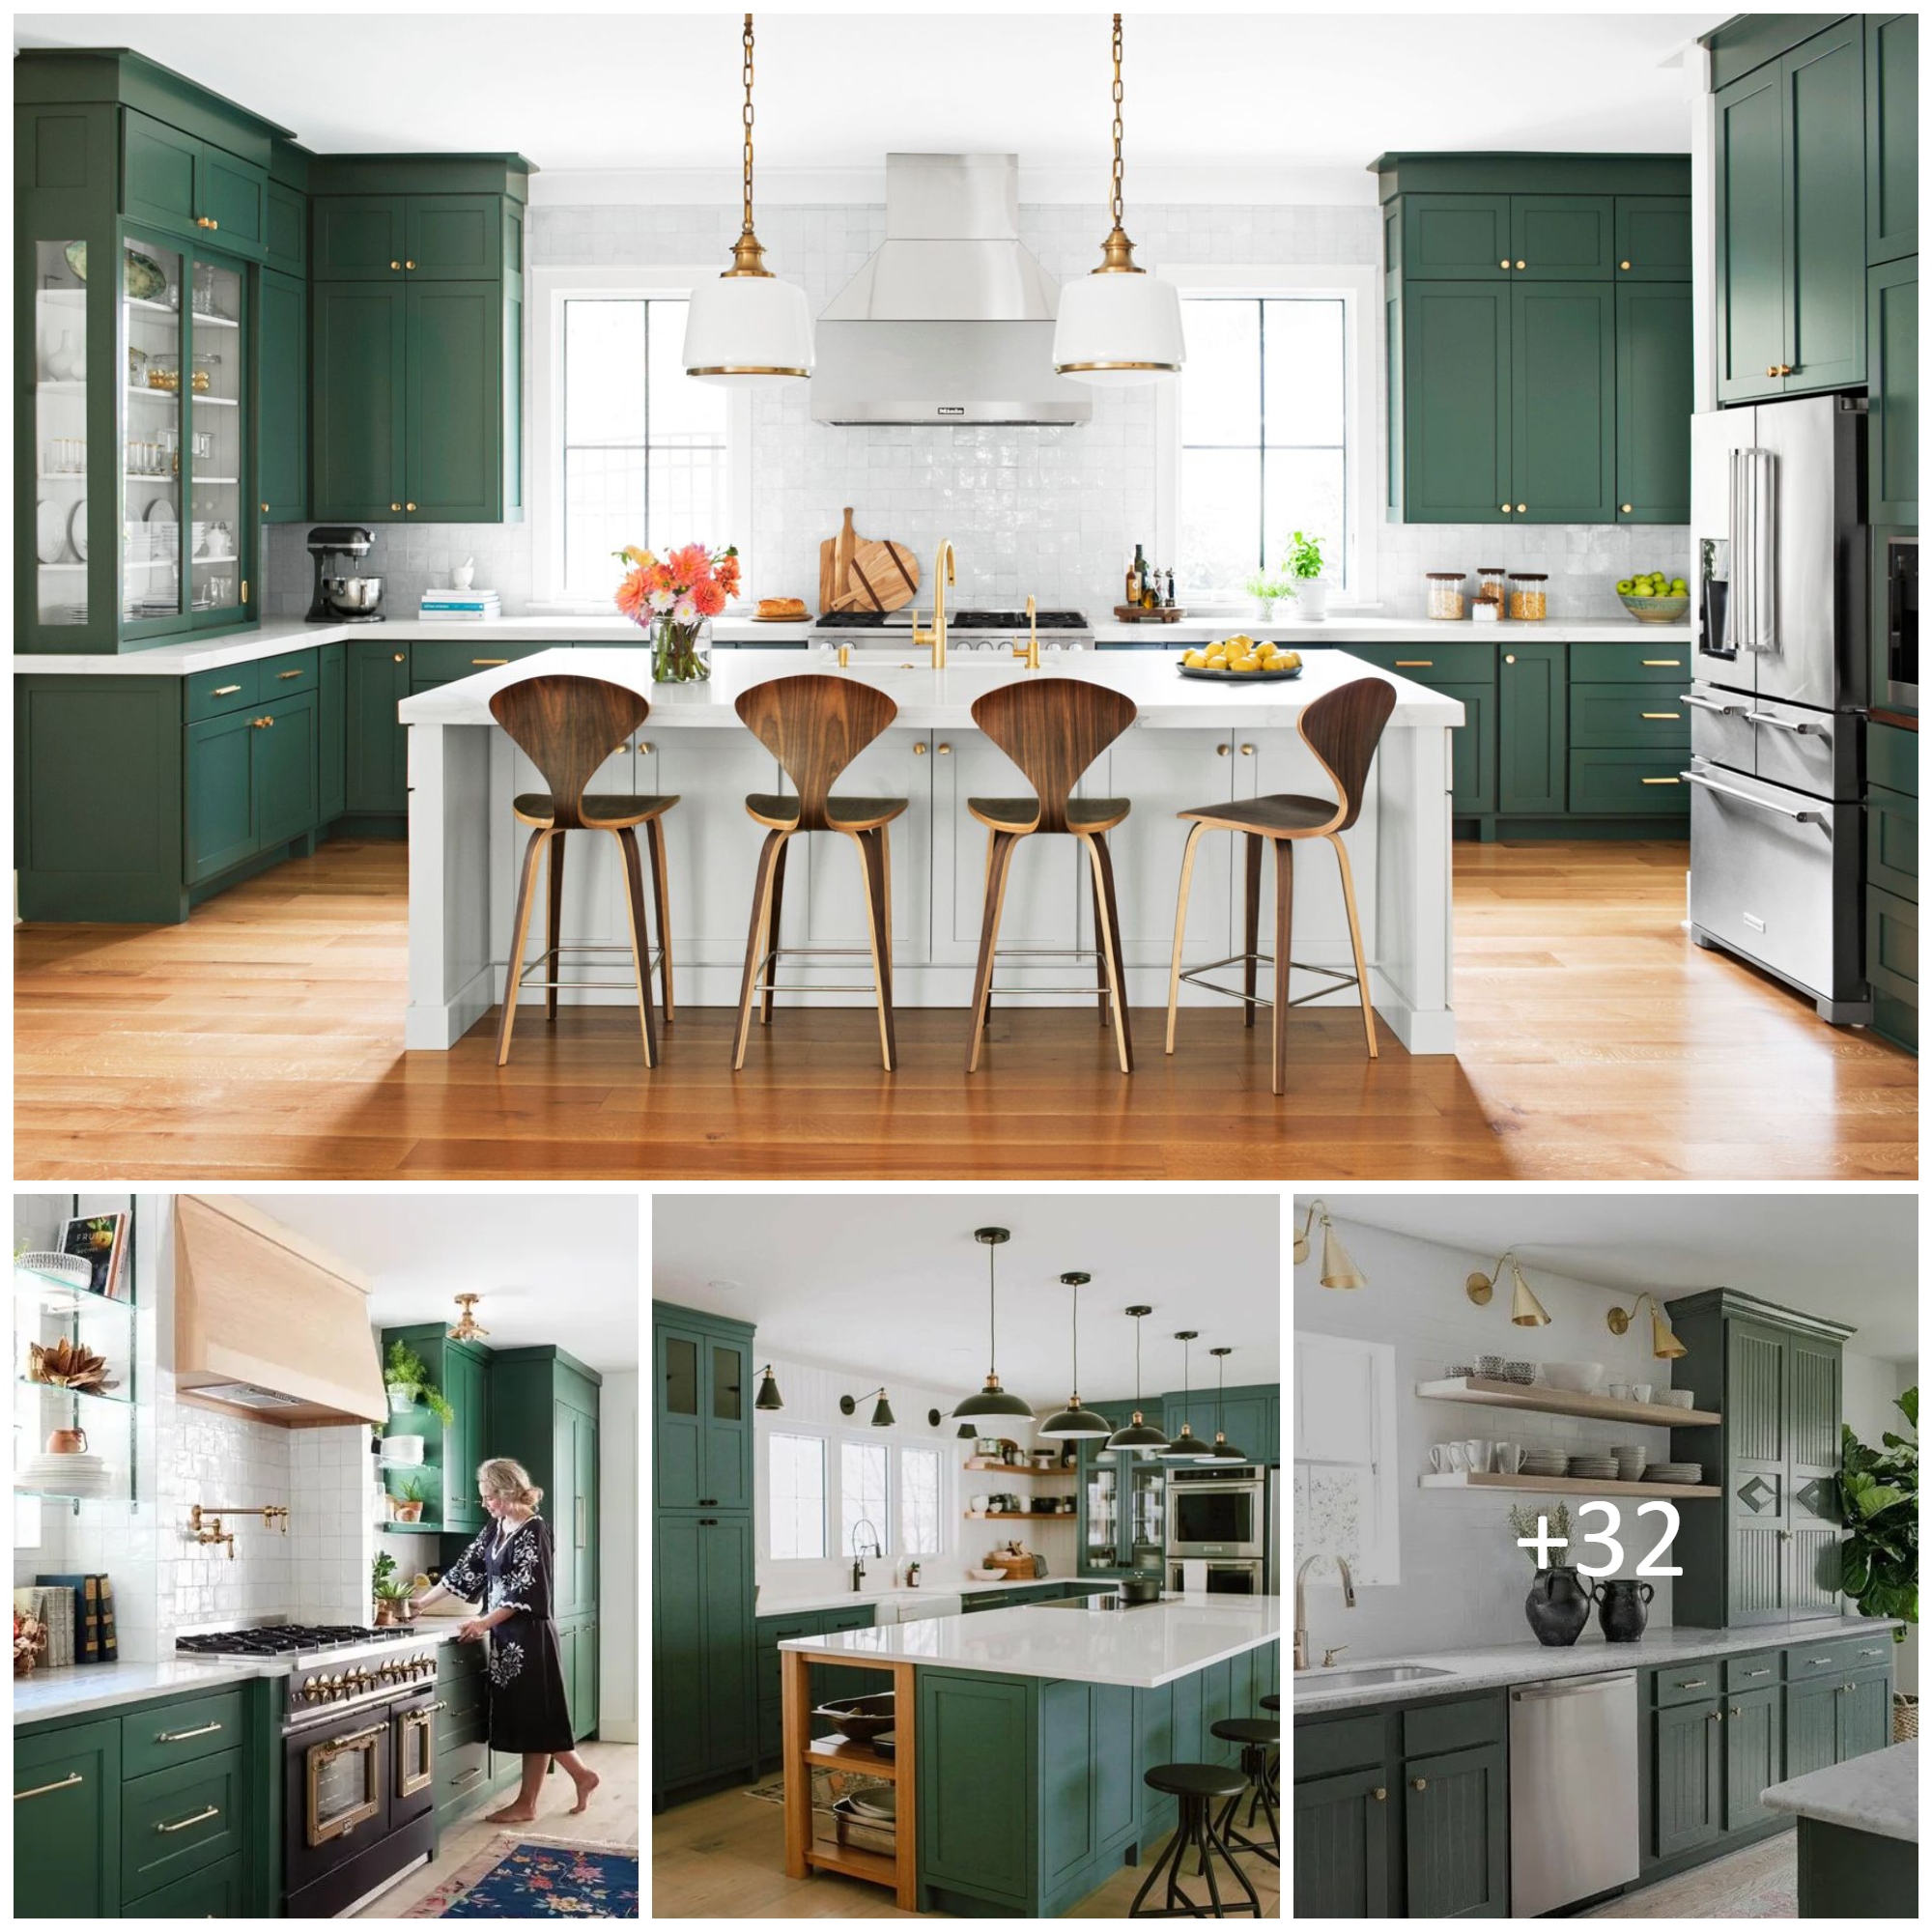 Green Kitchens That’ll Make You Want to Redo Yours